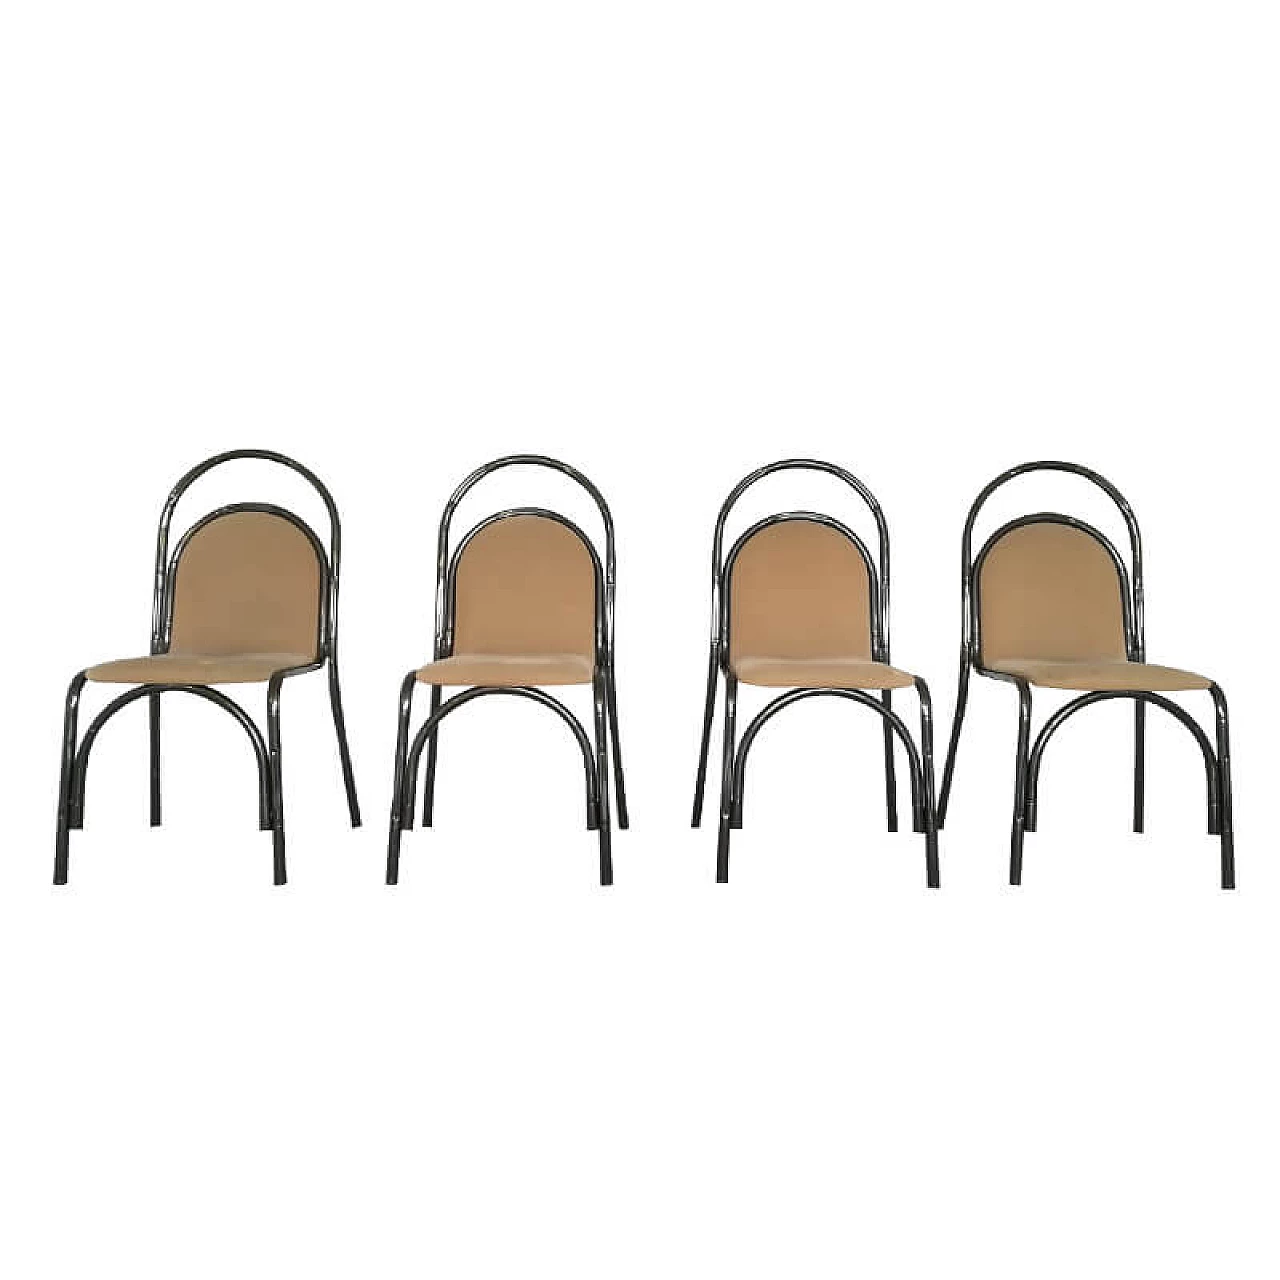 Set of 4 chairs and table in Maison Jansen style, 1950s 1077116